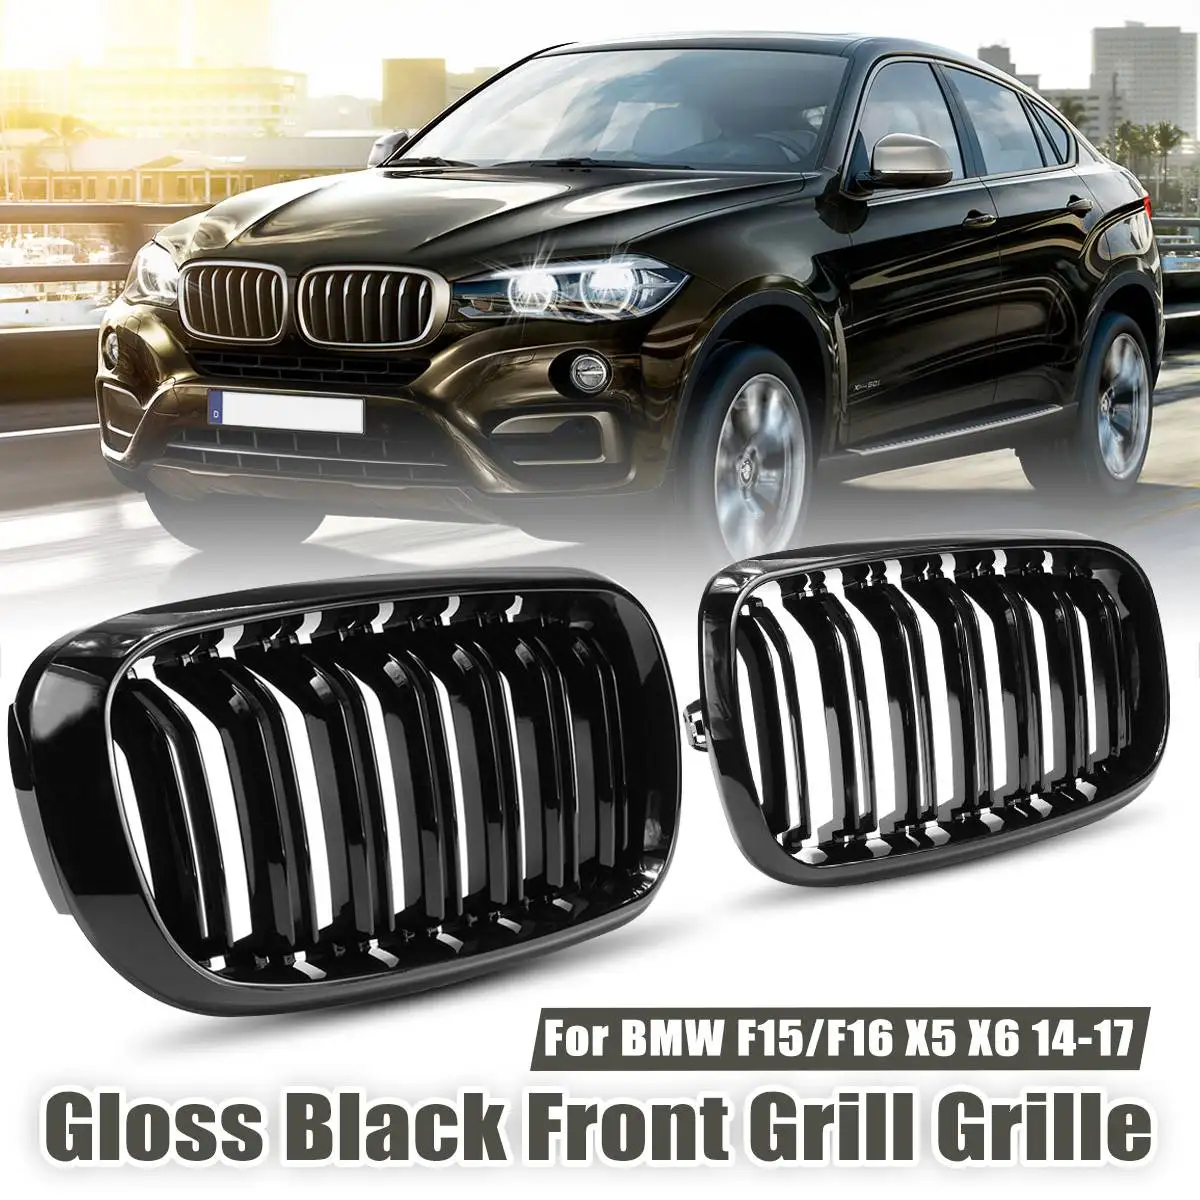 1 Pair of Car Front Grilles Gloss black double slat design for BMW X5 X6 2007-14 